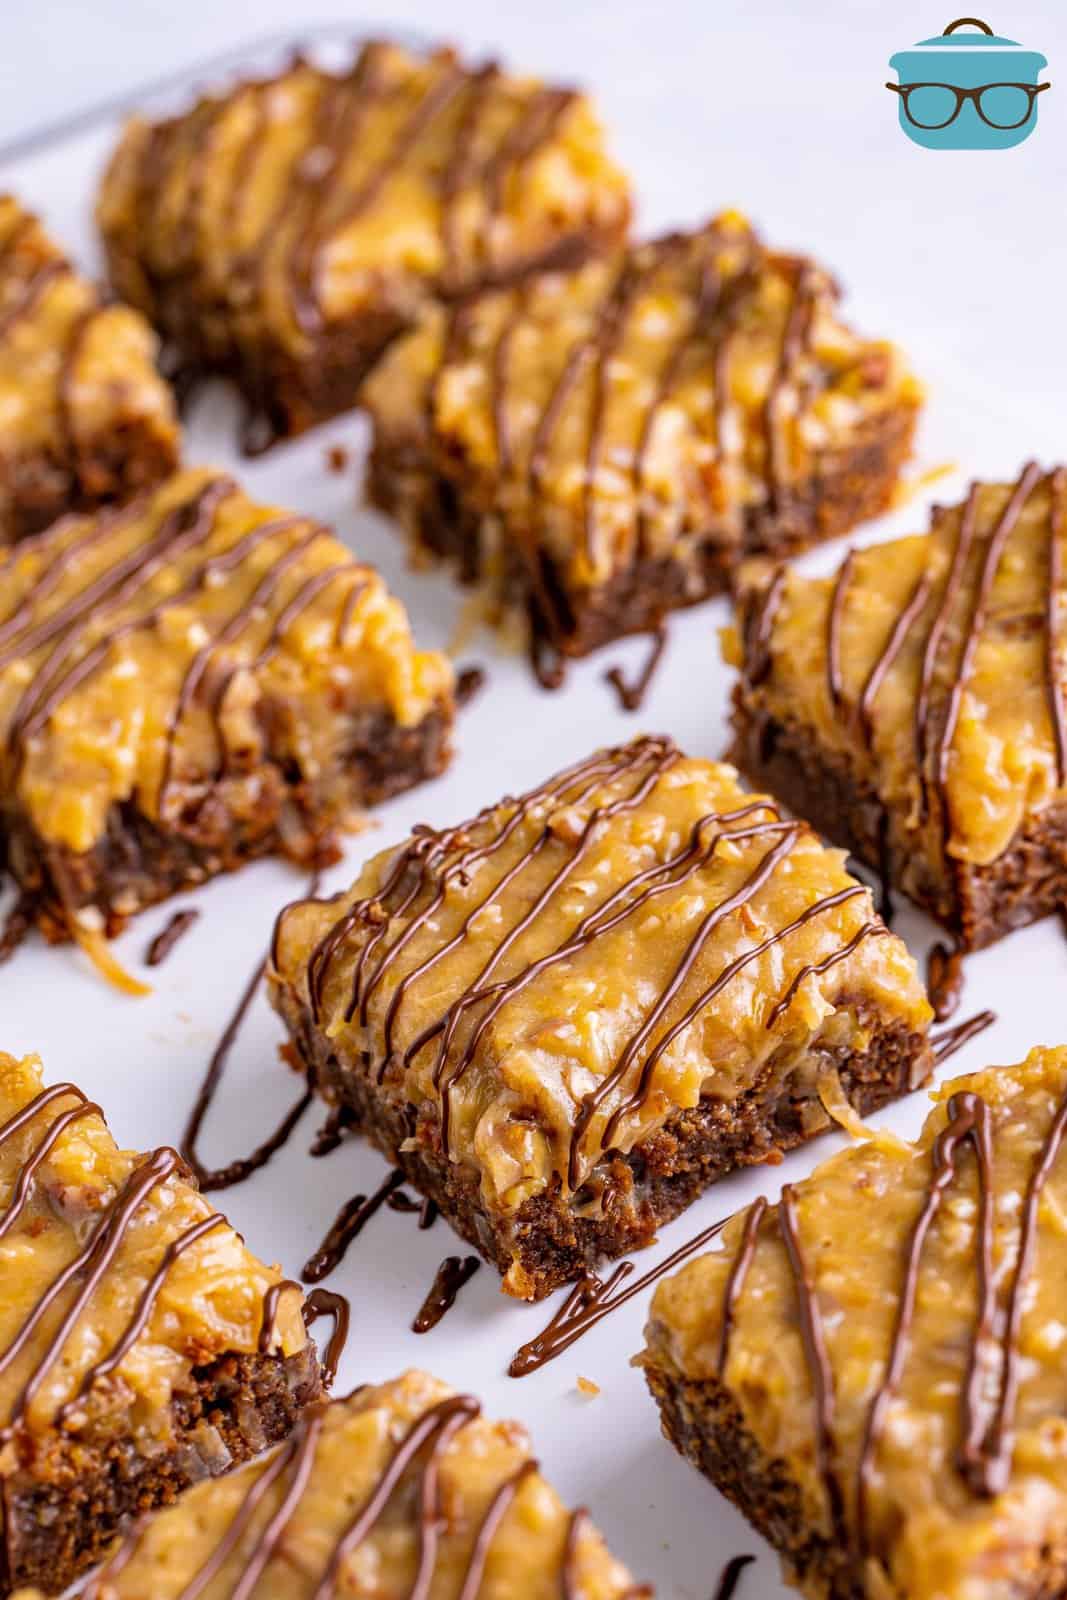 Sliced up German Chocolate Brownies drizzled with chocolate on parchment.